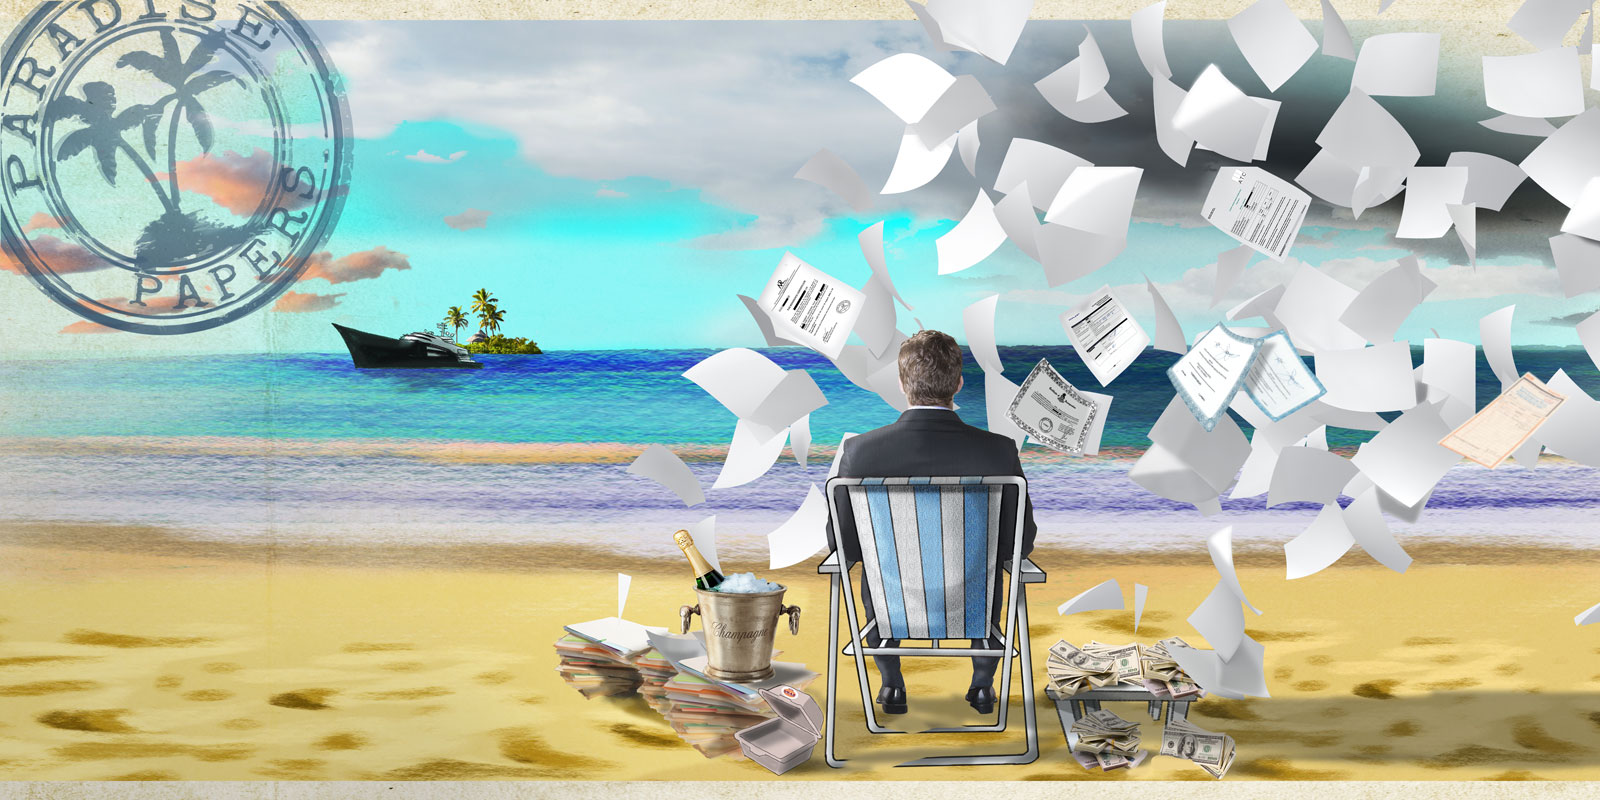 Tax wars, follow-up investigations and who was actually in the Paradise Papers?